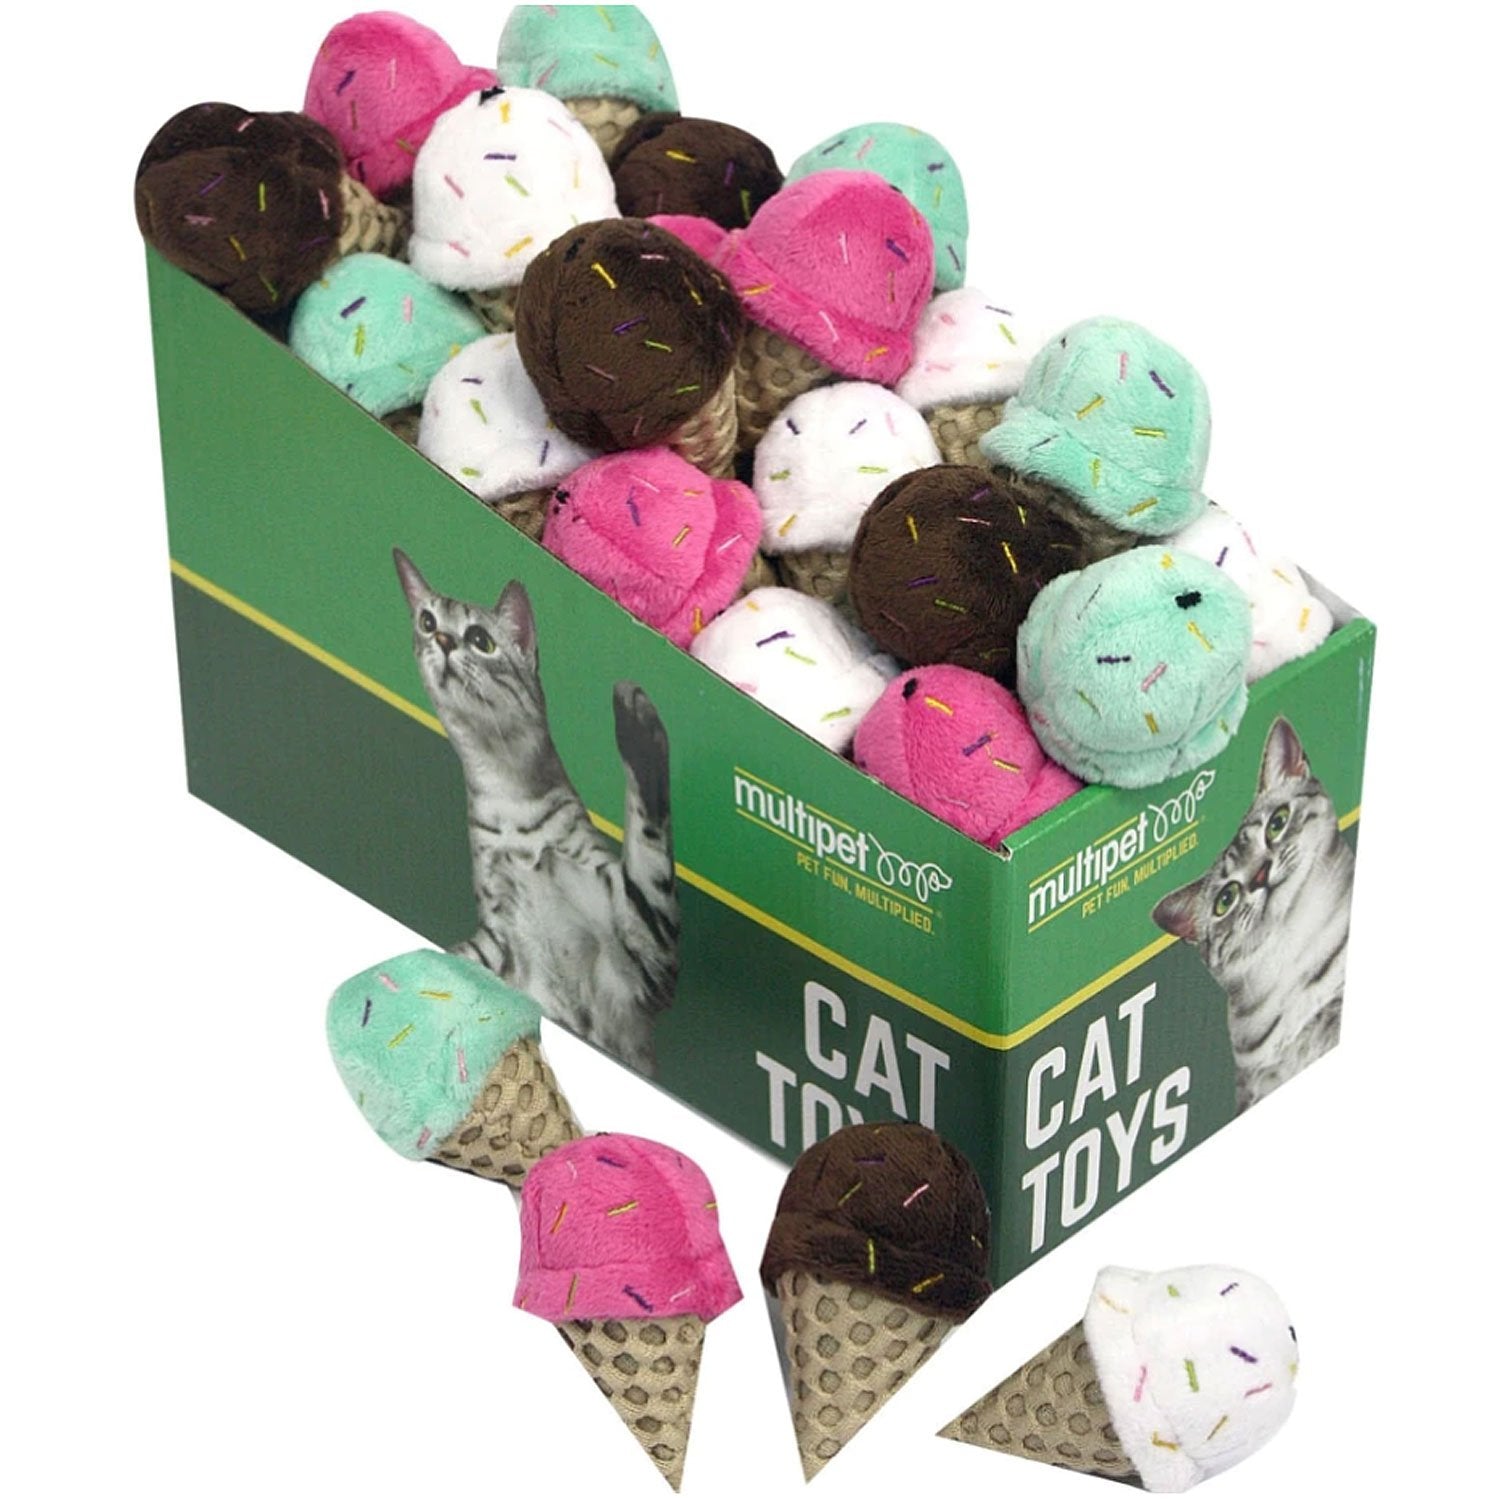 This Mini Ice-cream is perfect for your kitty's playtime, they can enjoy batting, tossing and carrying around this yummy Ice-Cream in their mouth and its filled with catnip to entice and encourage play!